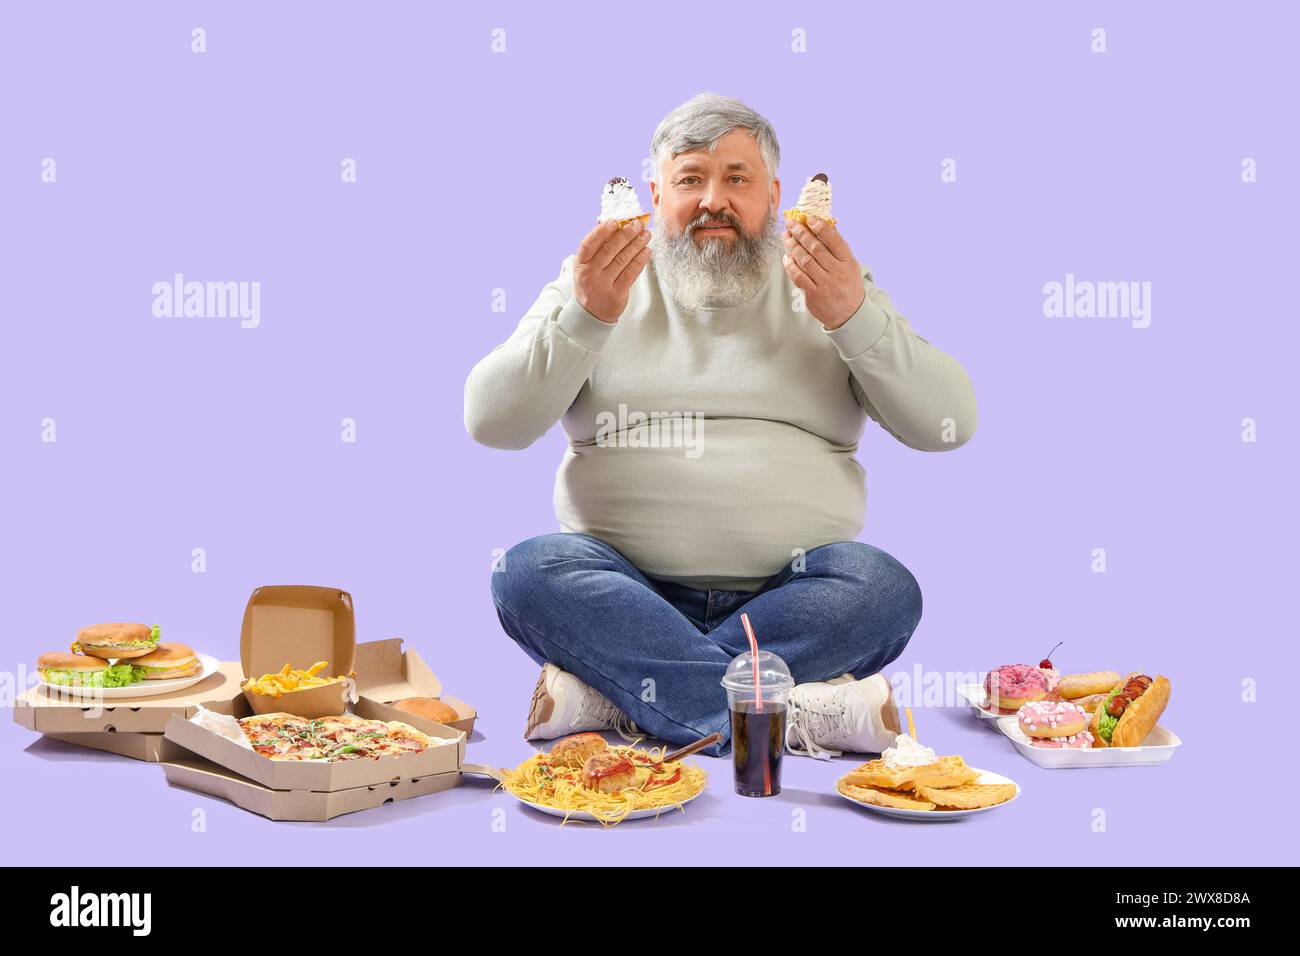 Overweight mature man with unhealthy food sitting on lilac background. Overeating concept Stock Photo